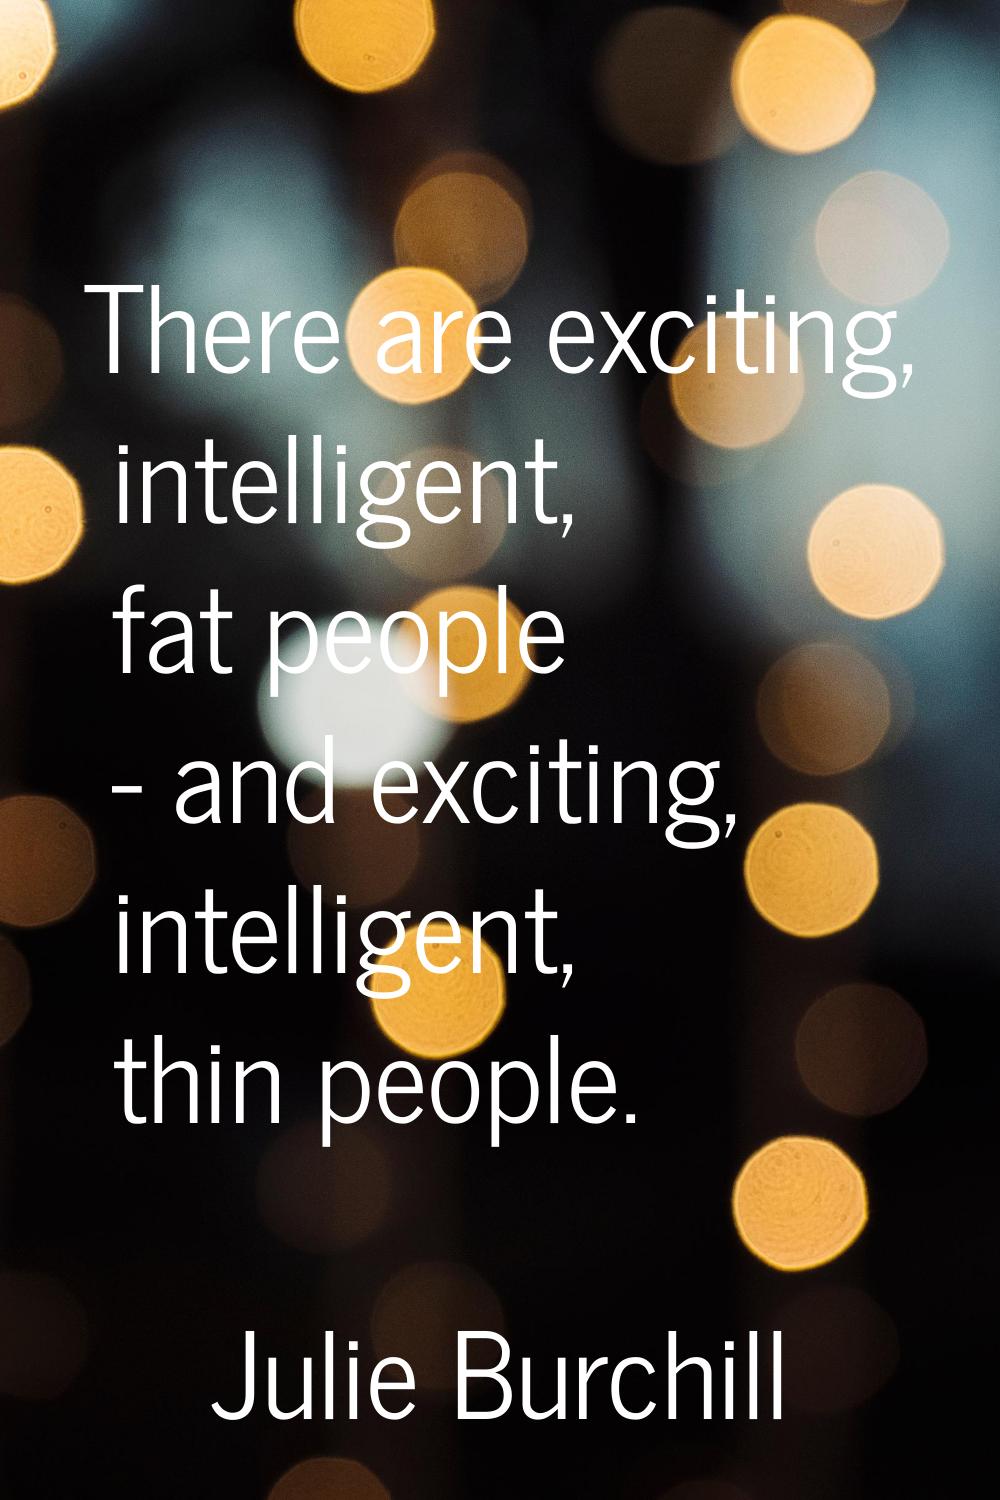 There are exciting, intelligent, fat people - and exciting, intelligent, thin people.